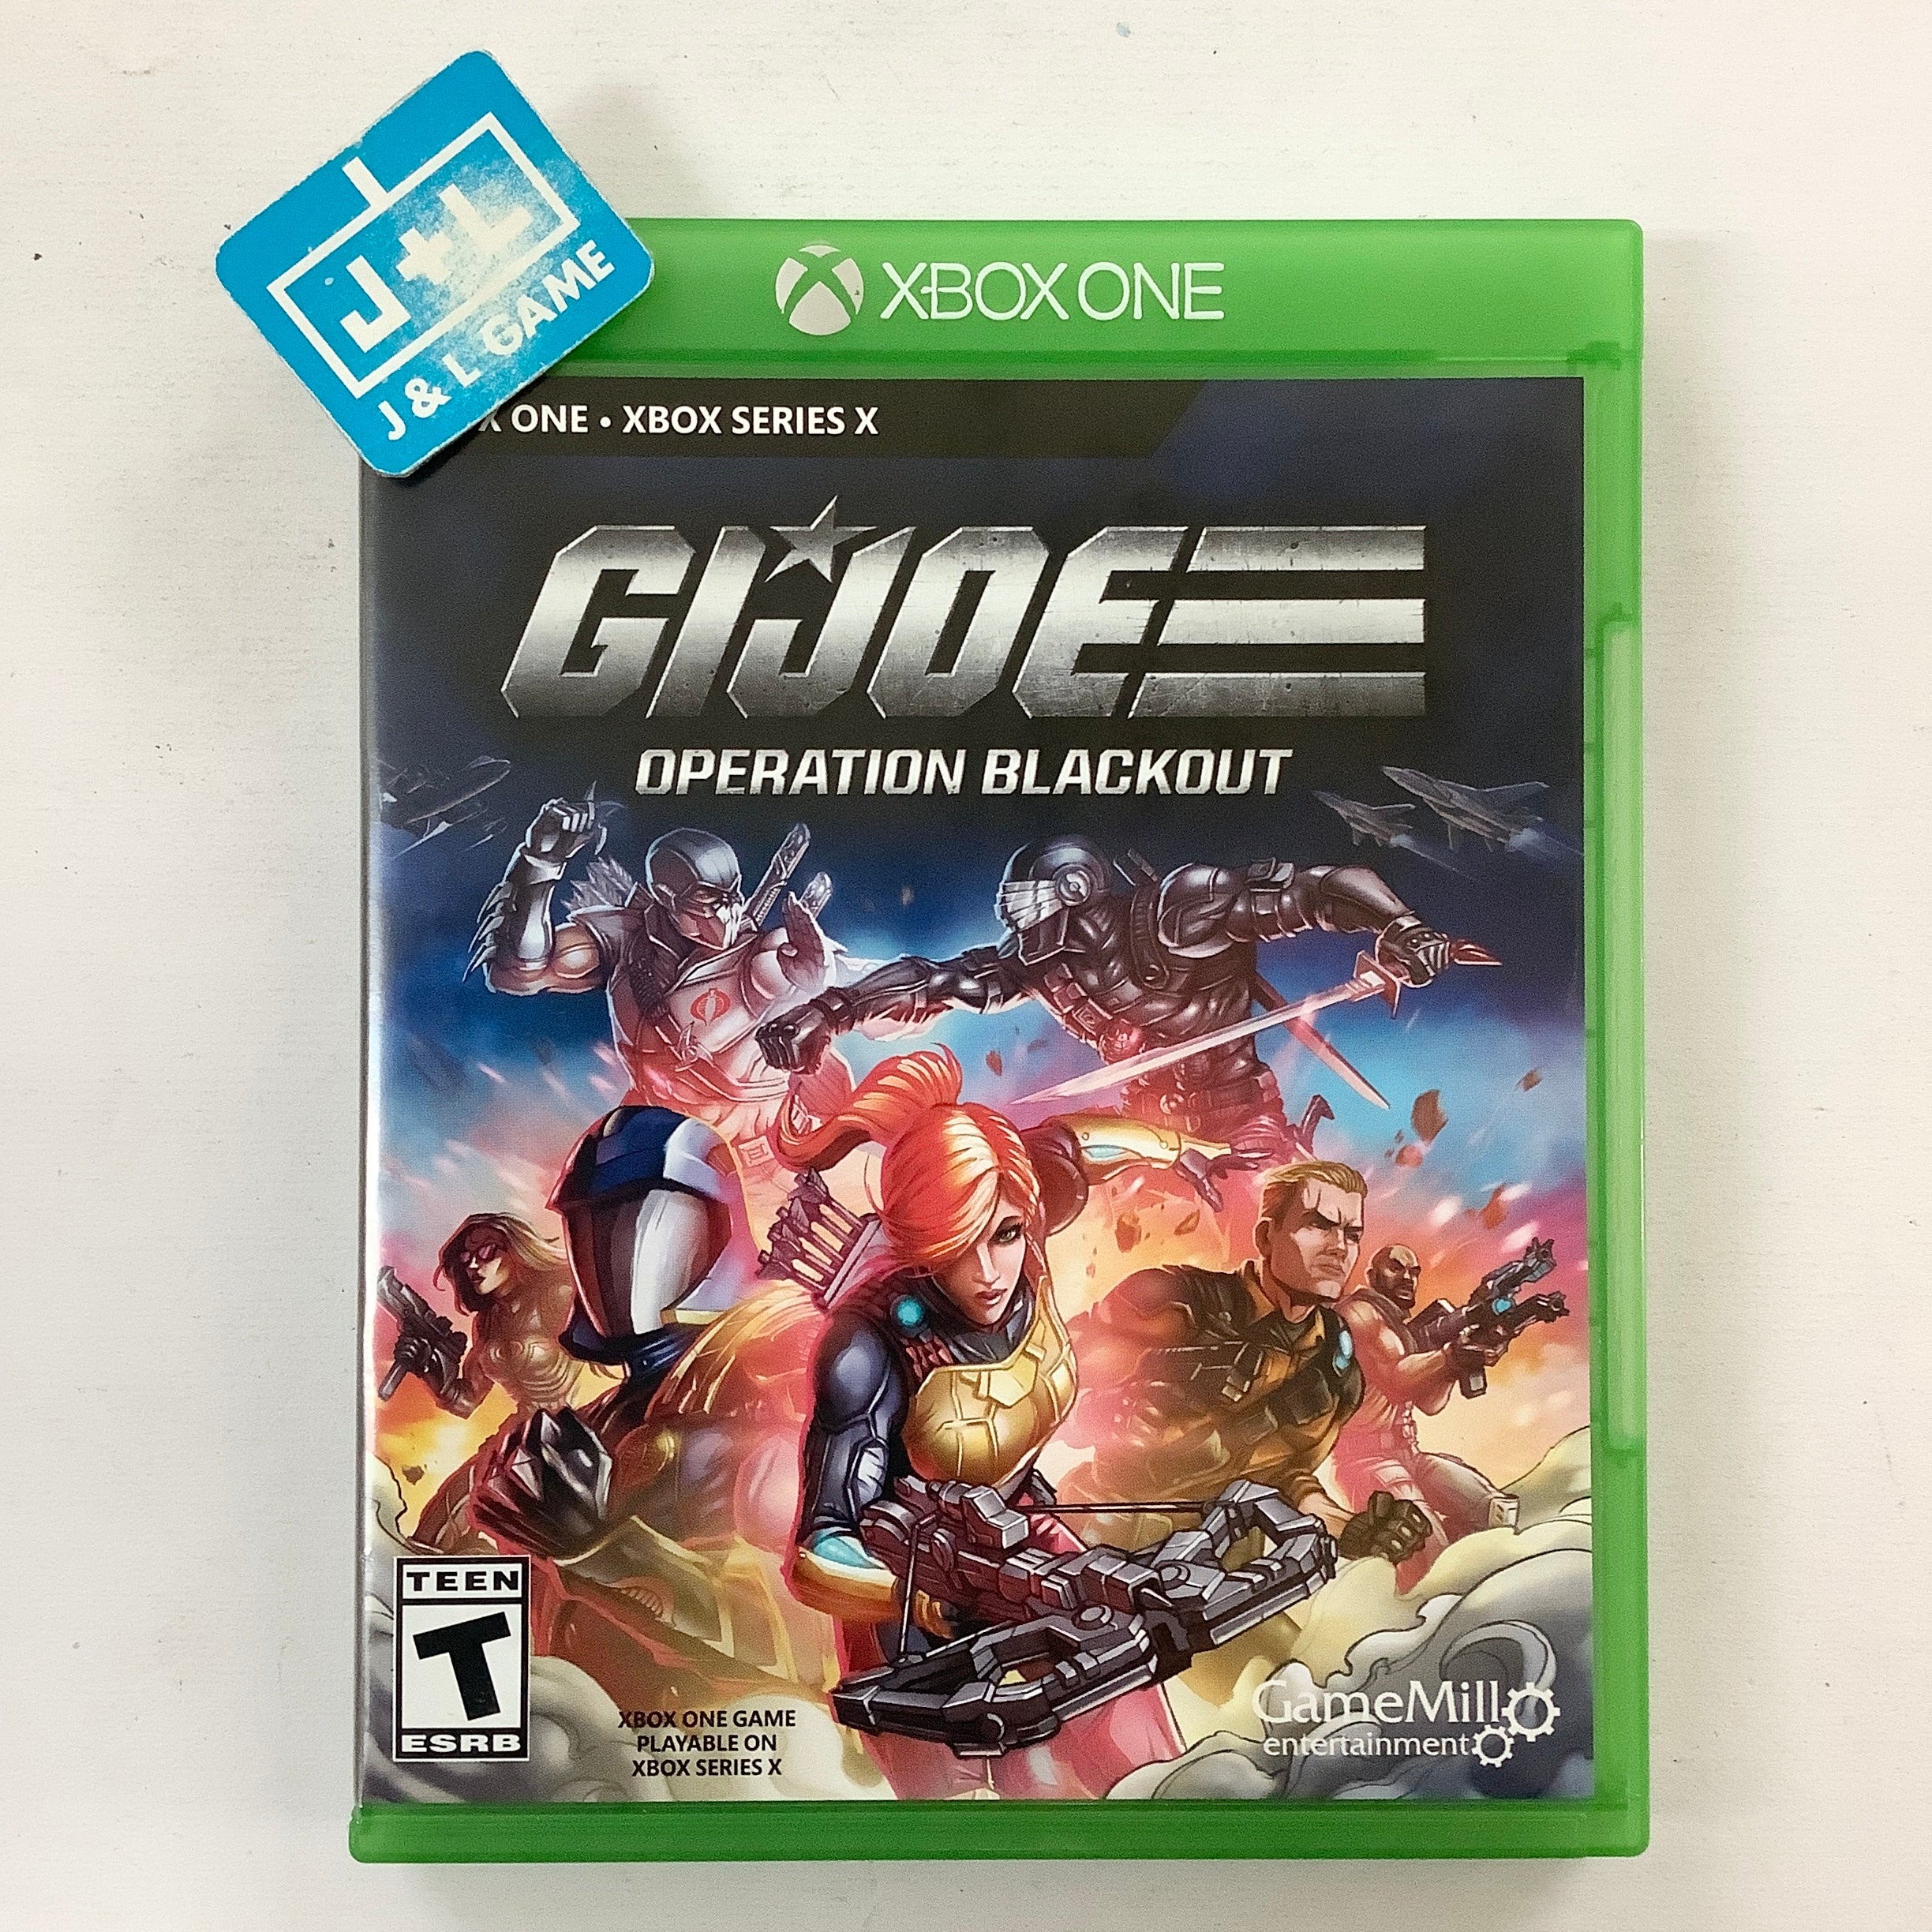 G.I. Joe: Operation Blackout - (XB1) Xbox One [Pre-Owned] Video Games GameMill Entertainment   